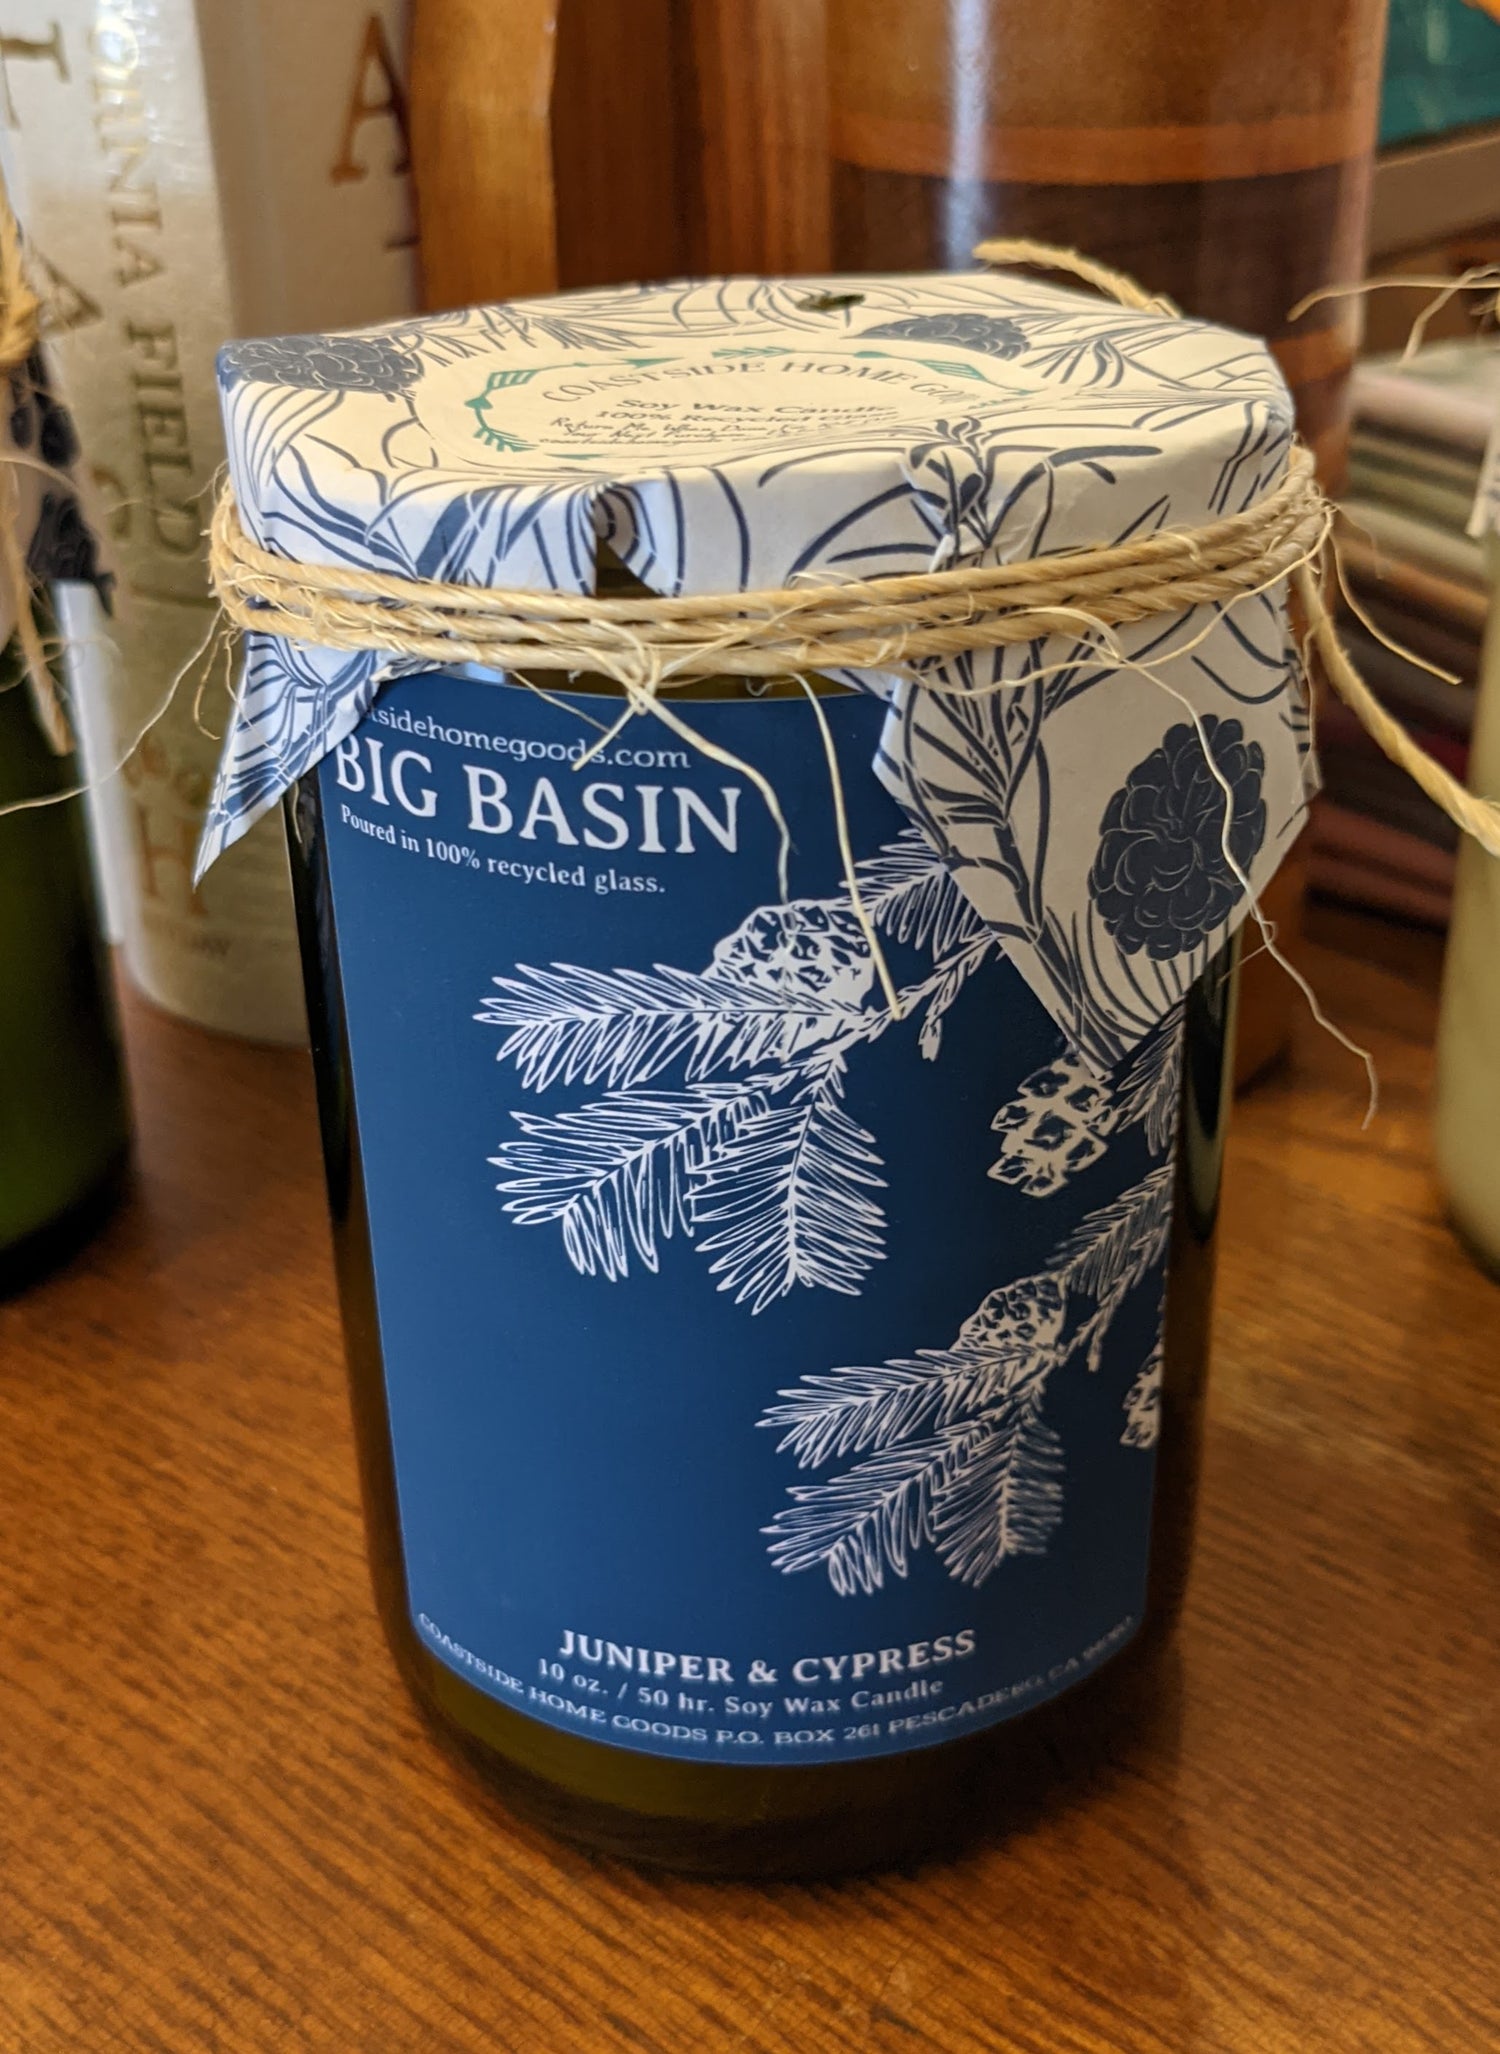 Big Basin candle with Juniper and Cypress scent in recycled wine bottle by Coastside Homegoods